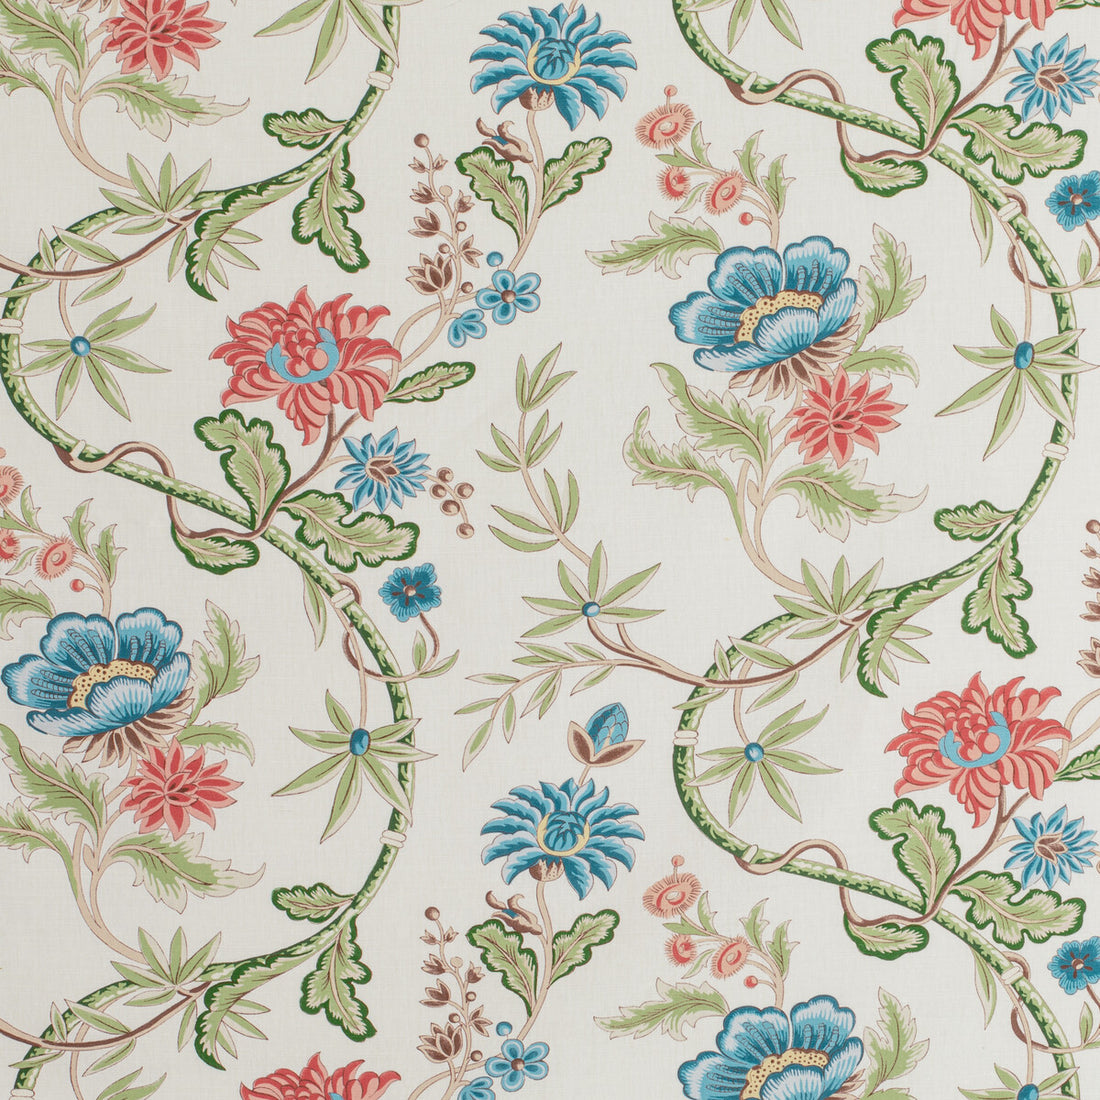 Veronique Print fabric in spring color - pattern 8020122.3137.0 - by Brunschwig &amp; Fils in the Louverne collection